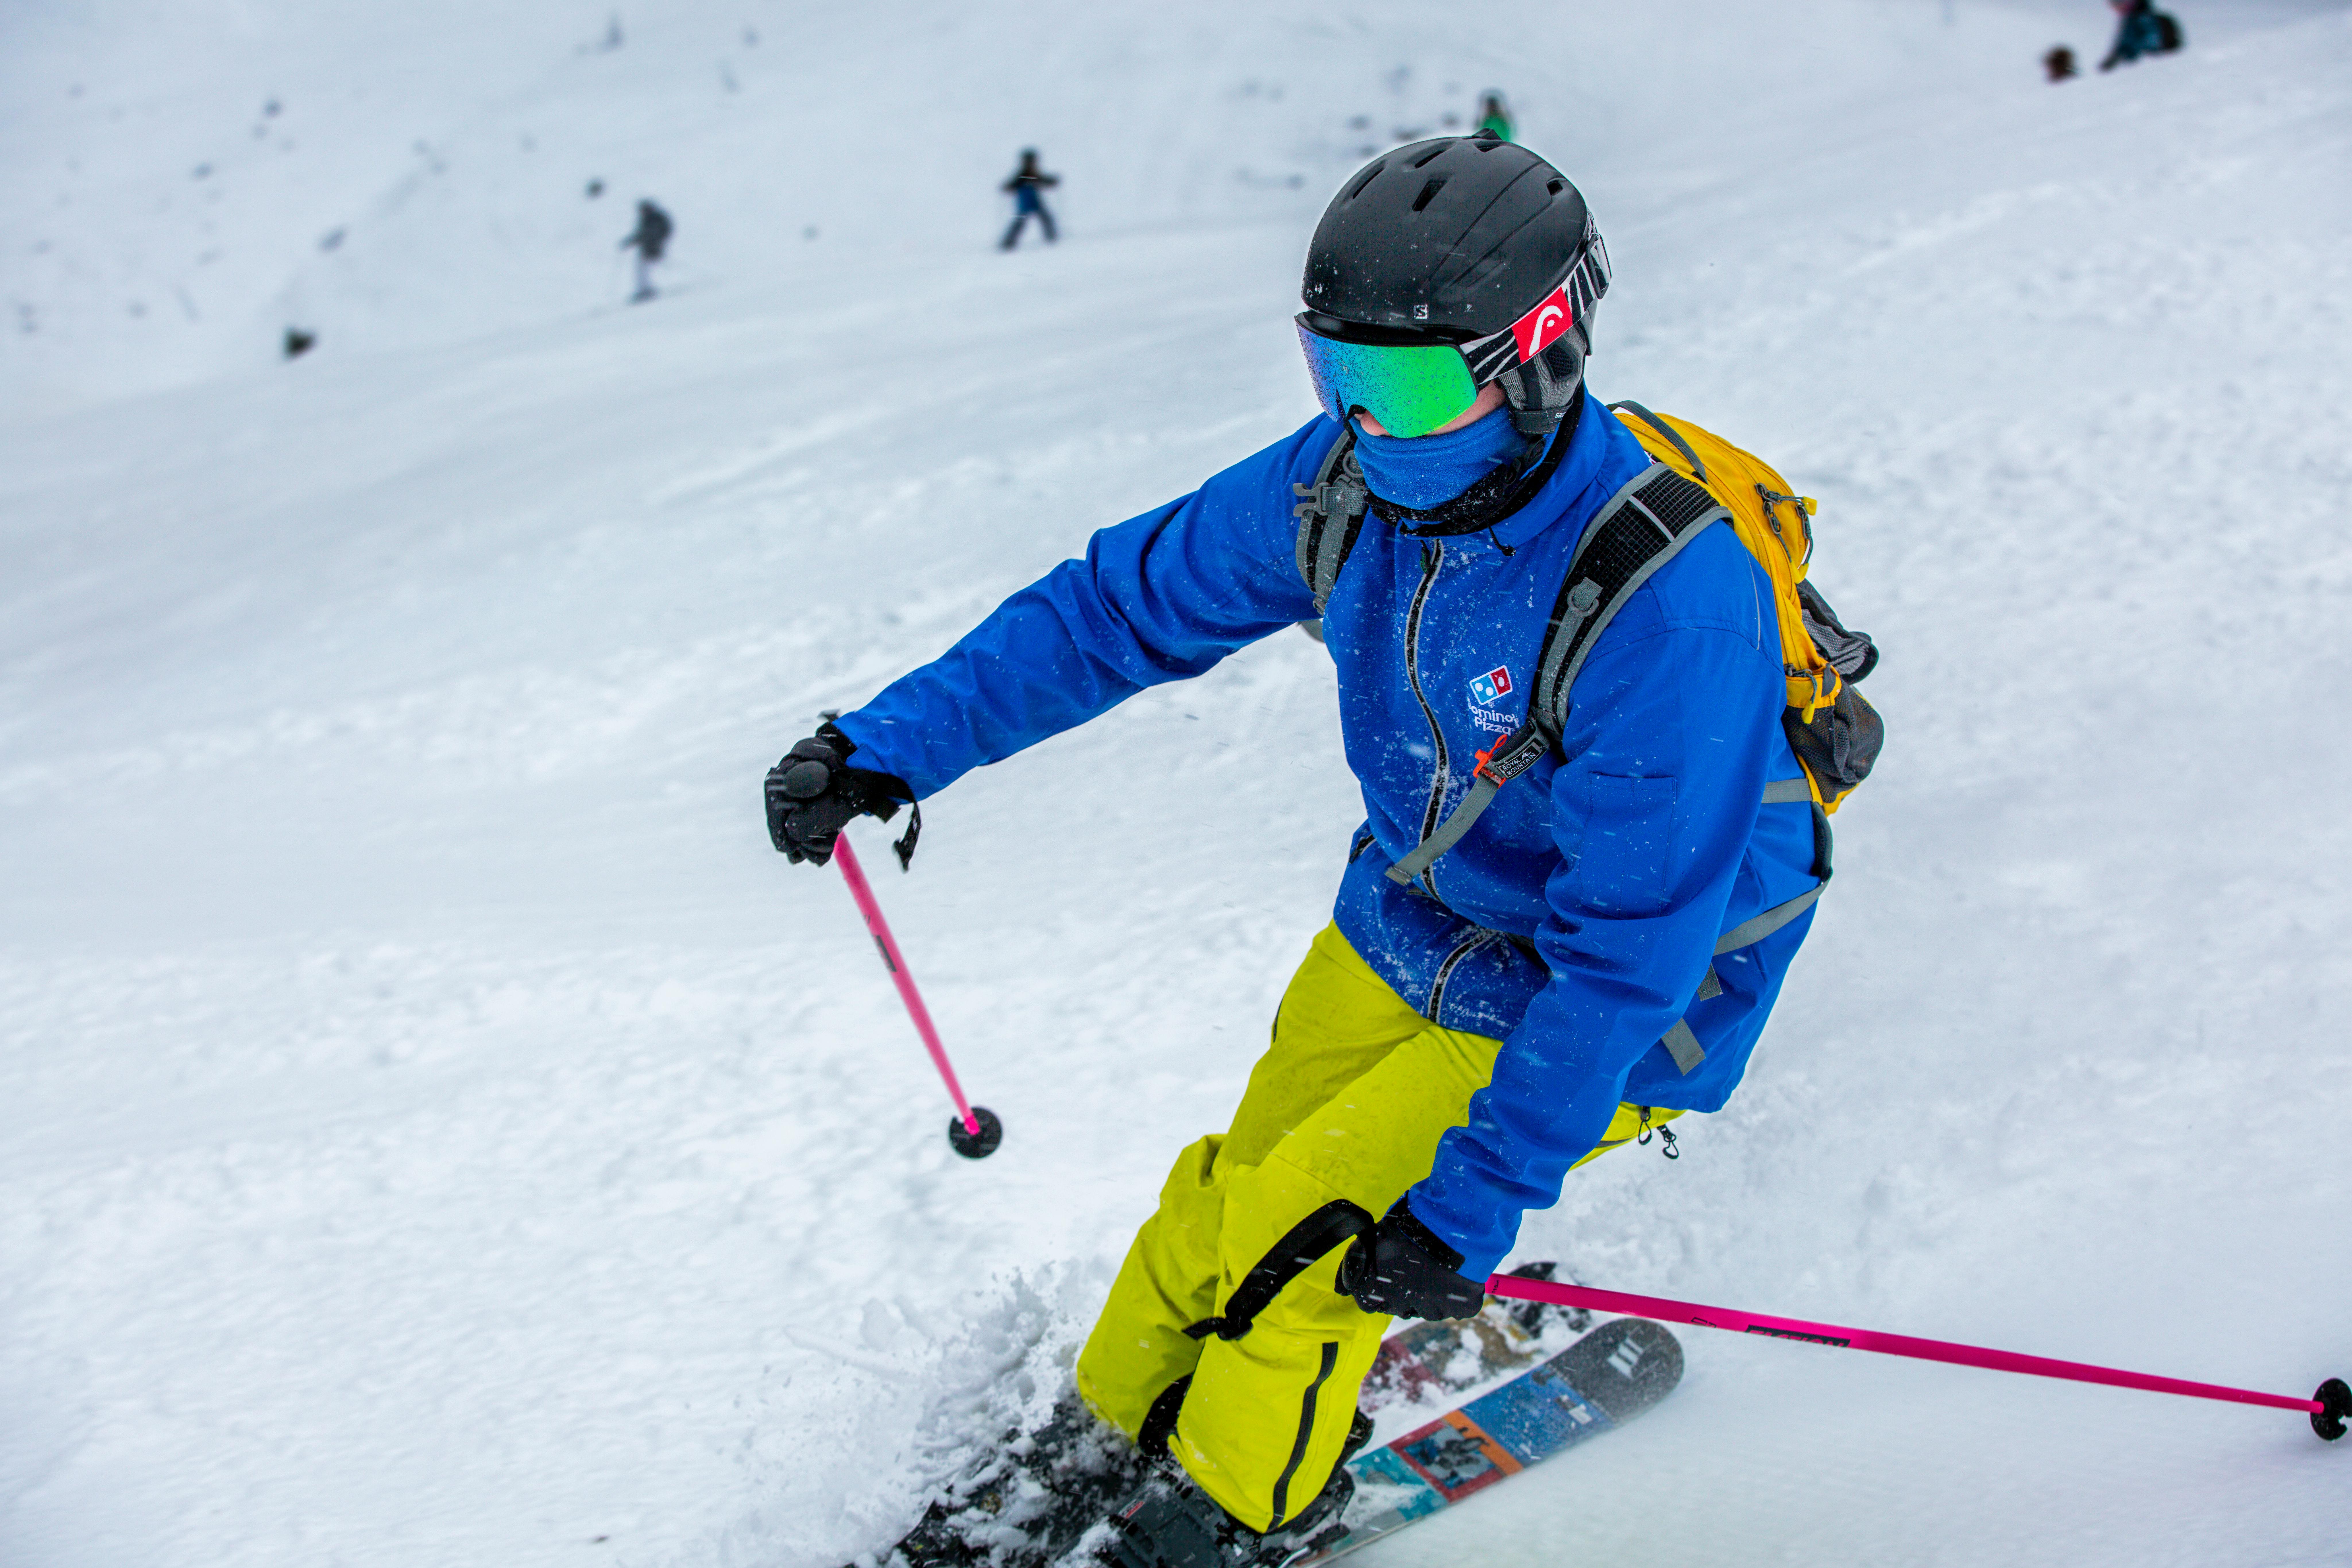 Man skier in black ski suit and goggles skiing downhill trough